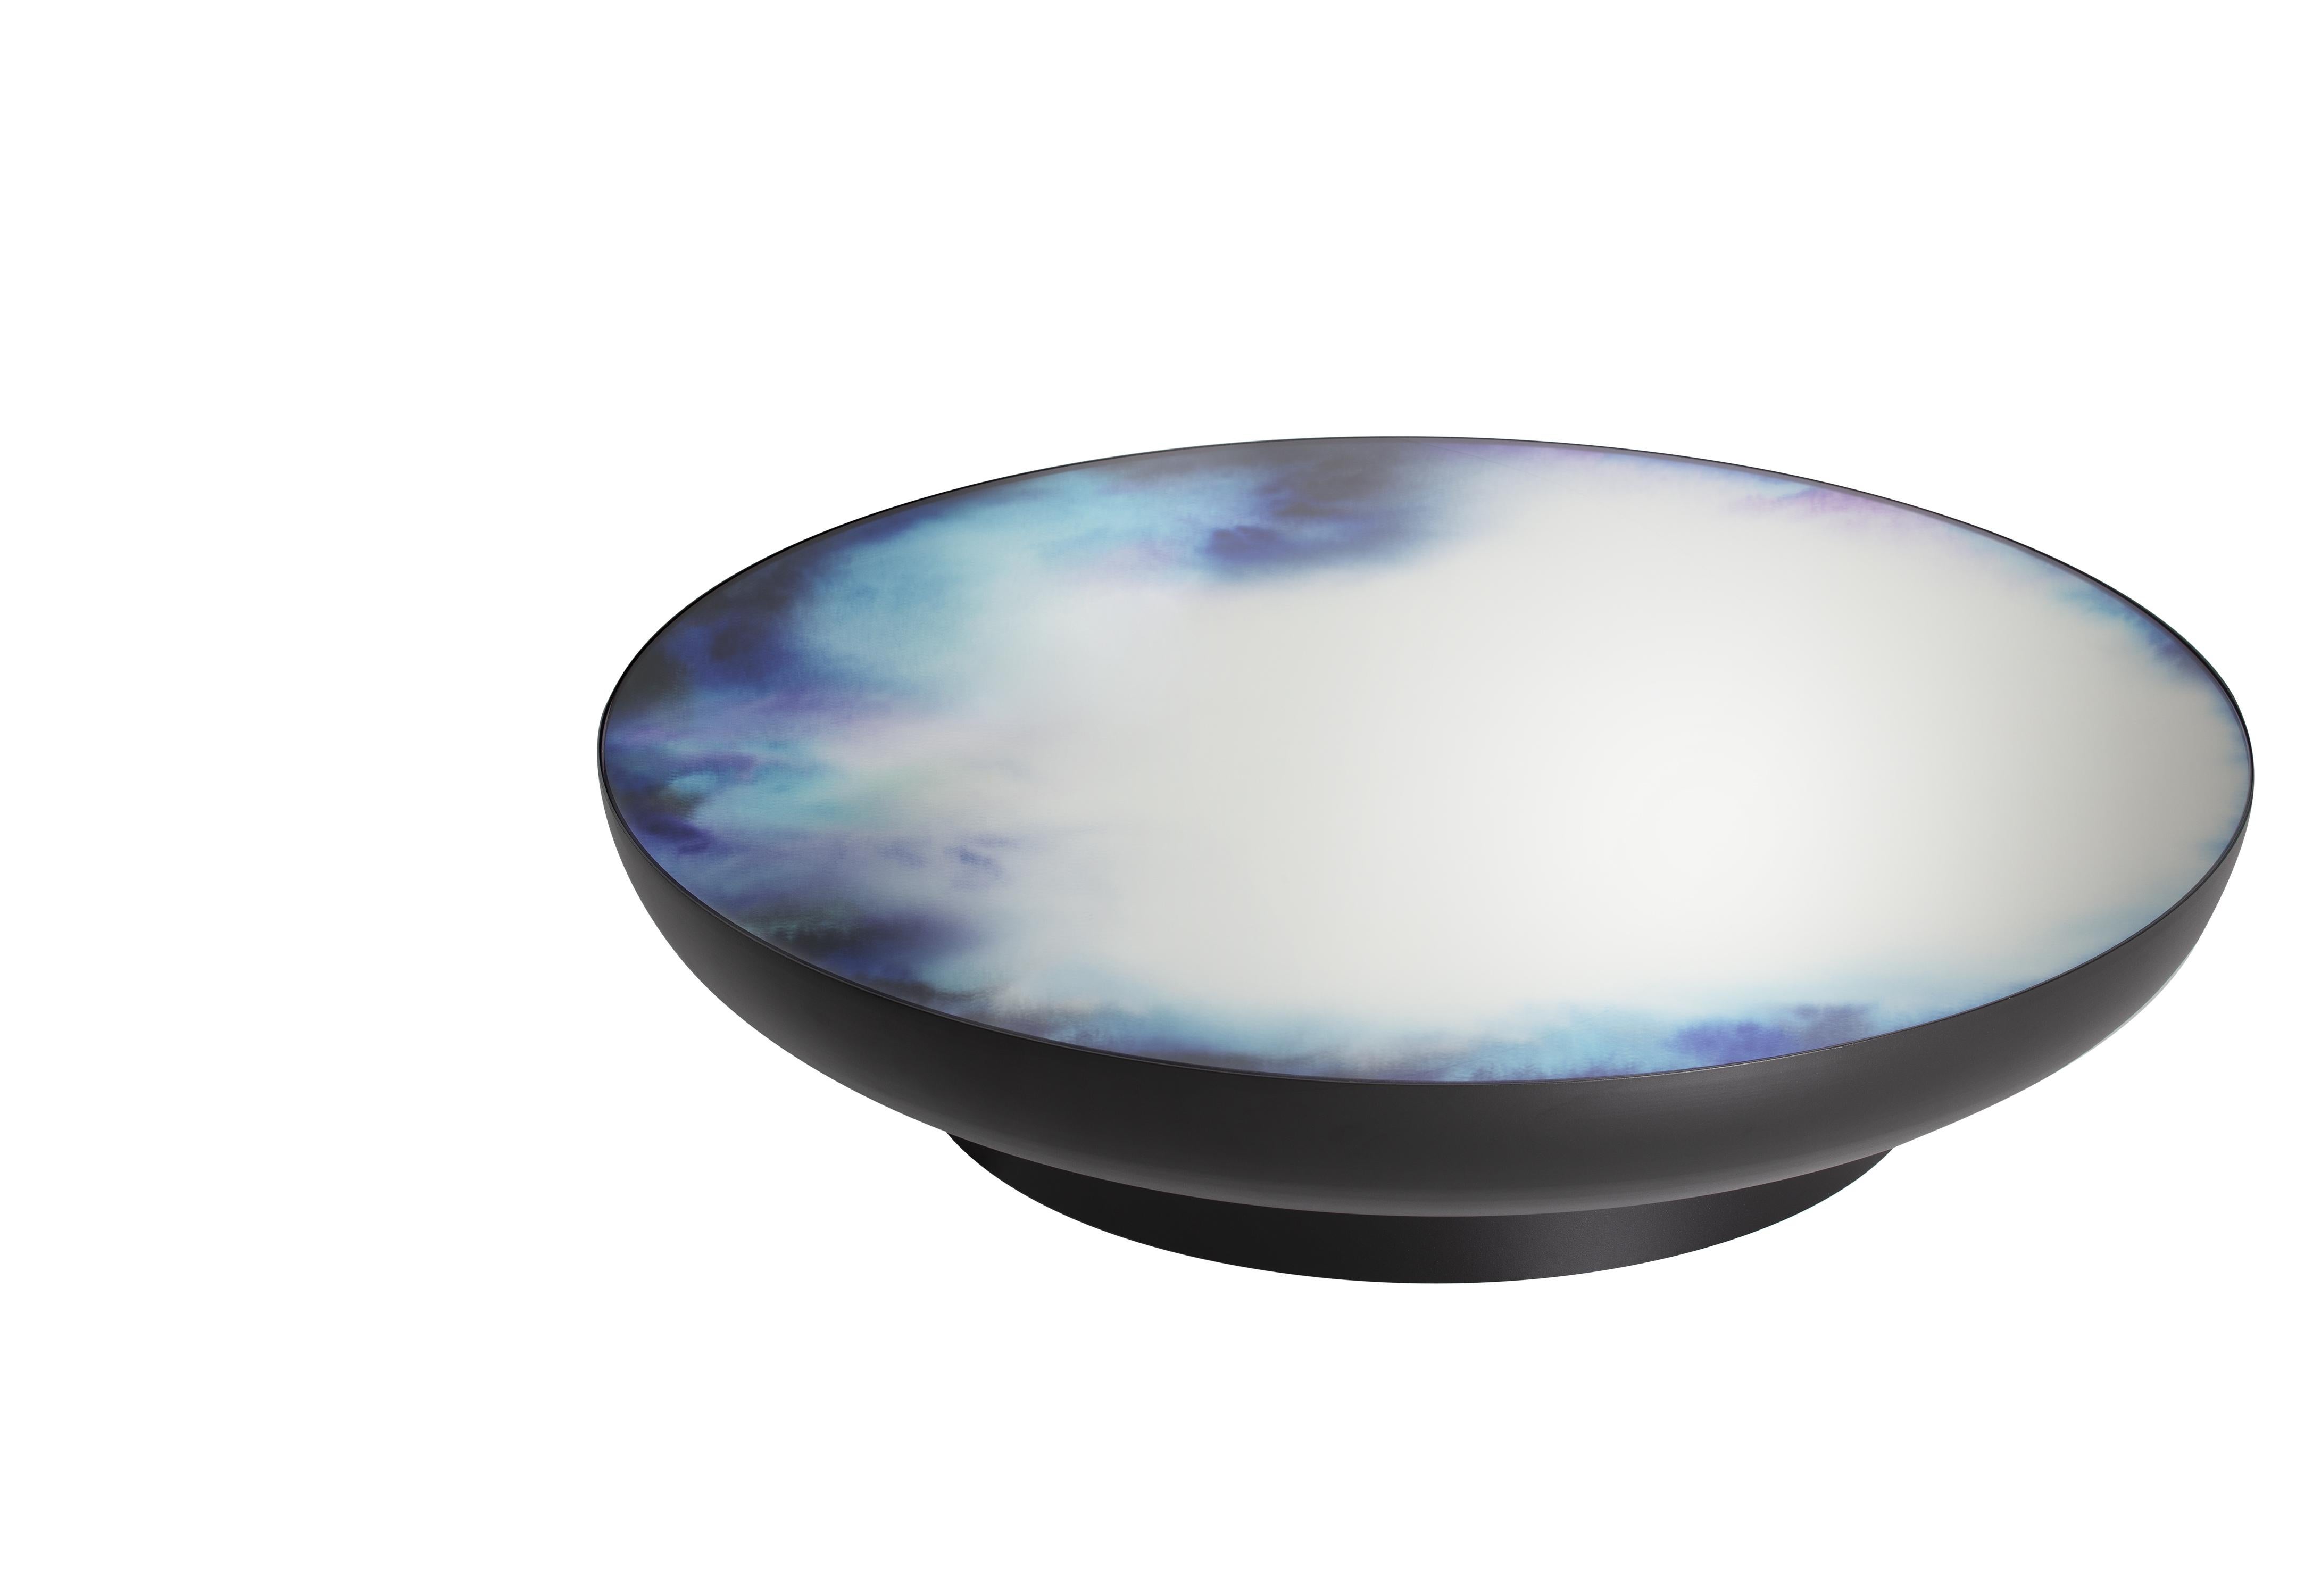 Petite Friture Extra Large Francis Coffee Table in Black & Blue Watercolour Mirror by Constance Guisset, 2018

Francis collection starts with a painter brush resting in a glass of water, when watercolour pigments reveal shifting drawings.